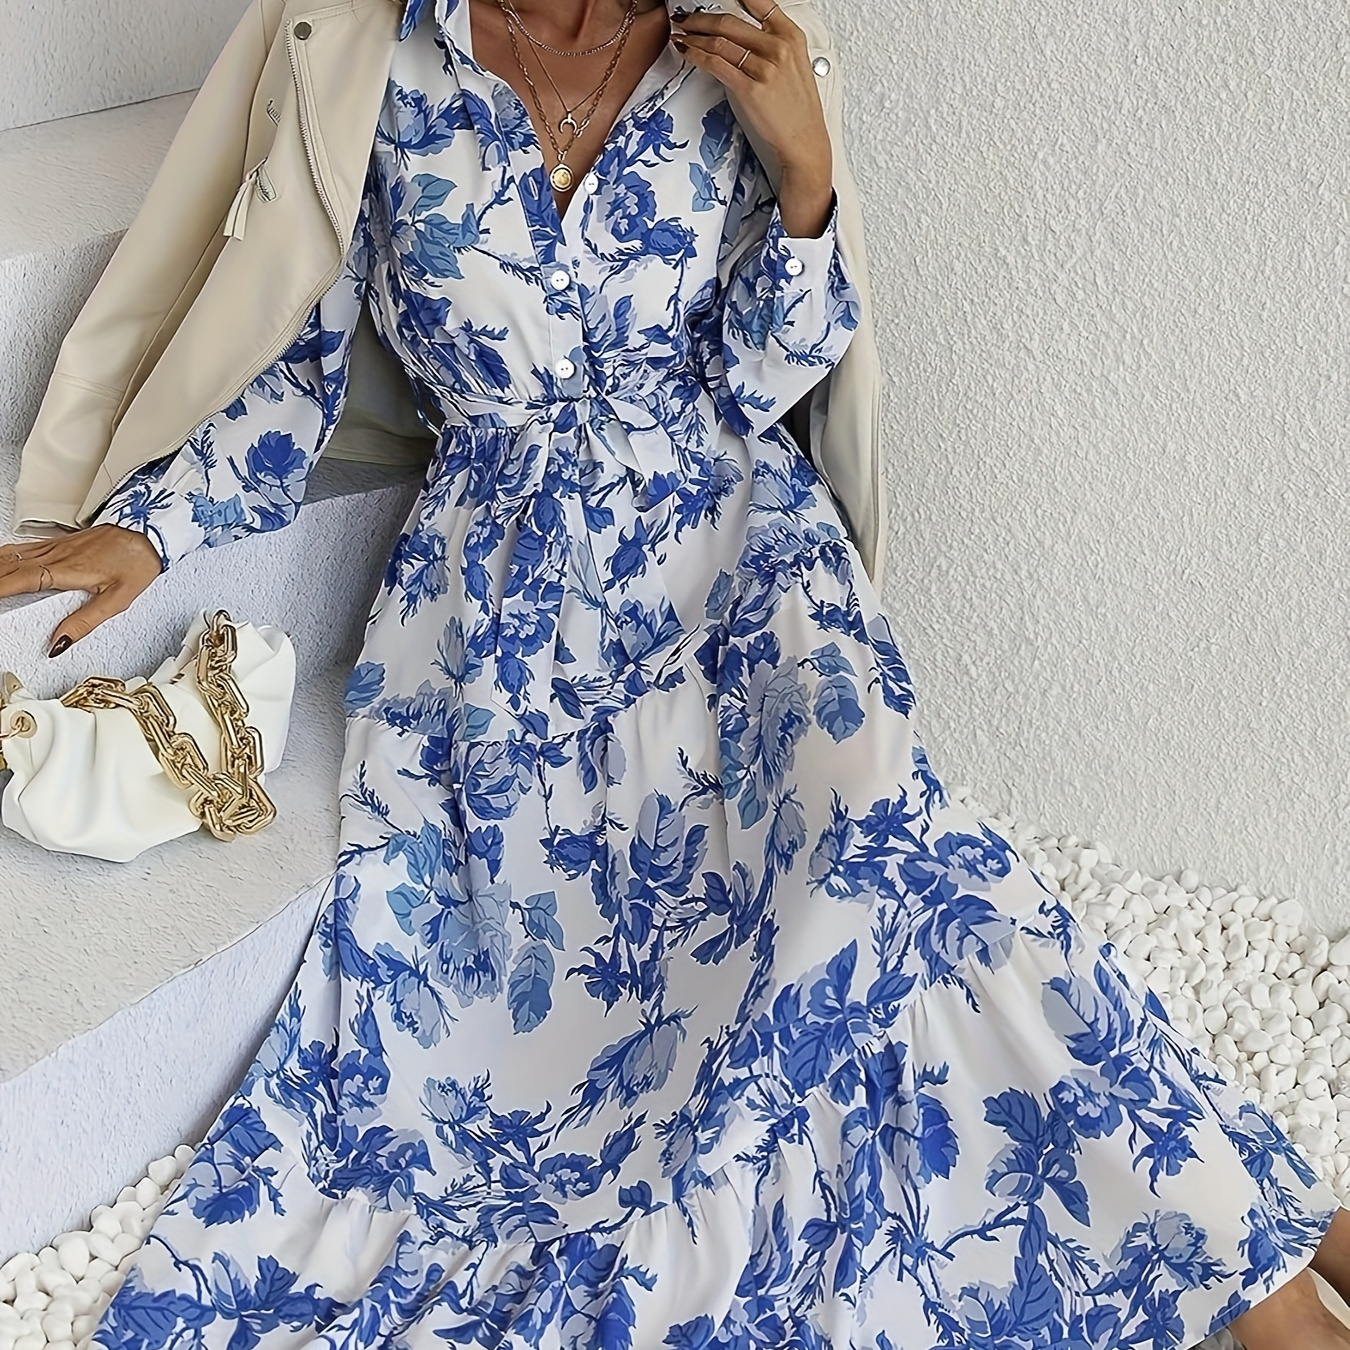 

Floral Print Button Front Dress, Vacation Style Long Sleeve Tie Waist A-line Dress For Spring & Fall, Women's Clothing